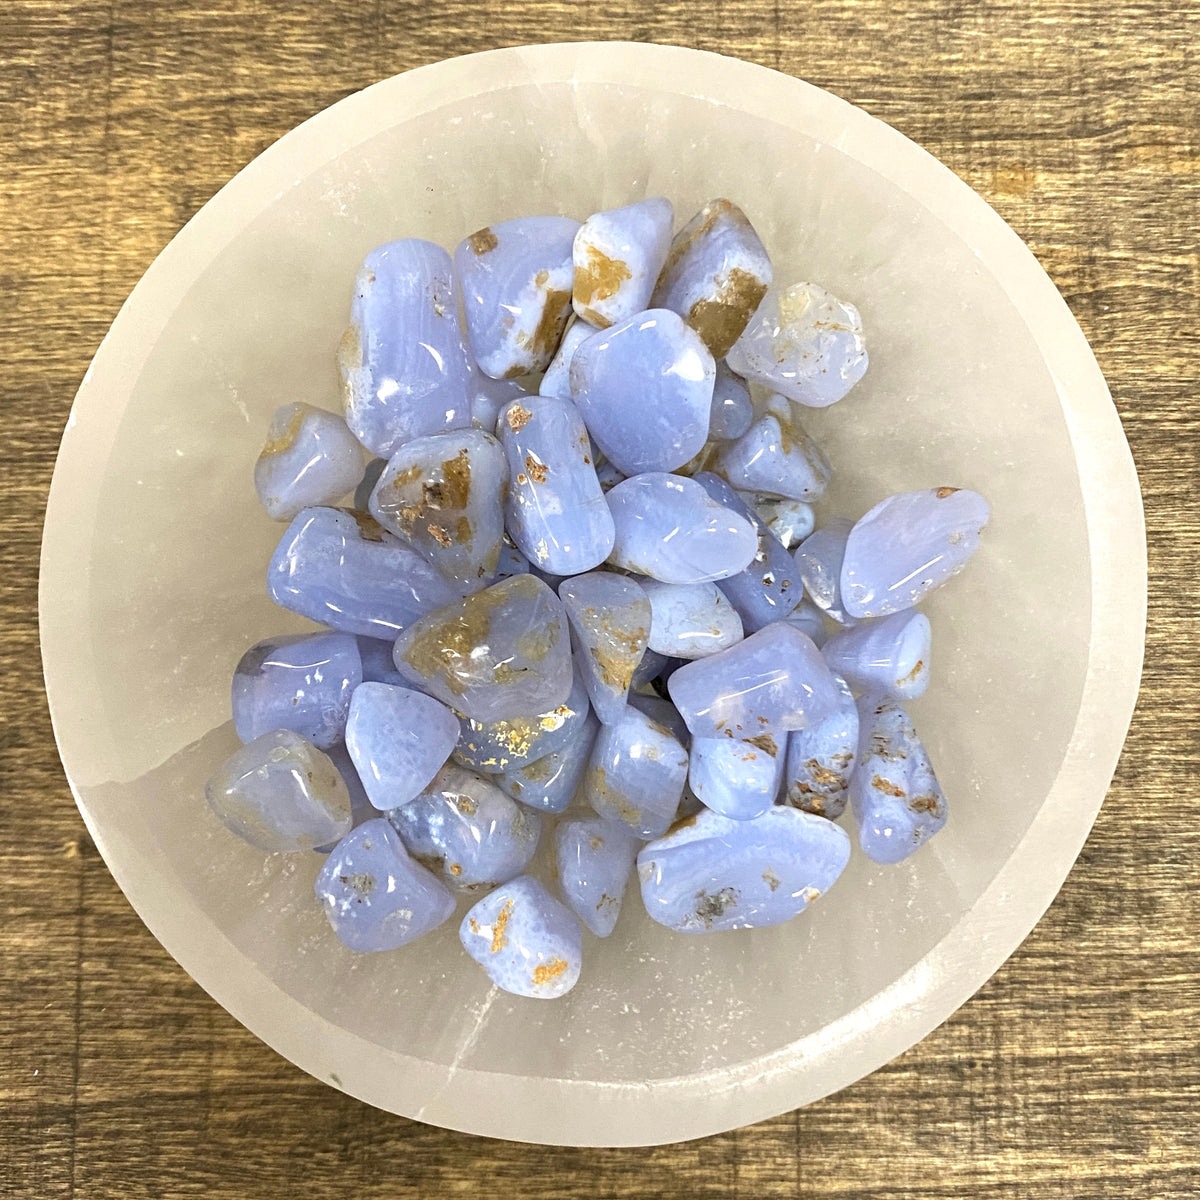 Overhead shot of various Blue Agate tumbled stones in a small bowl.